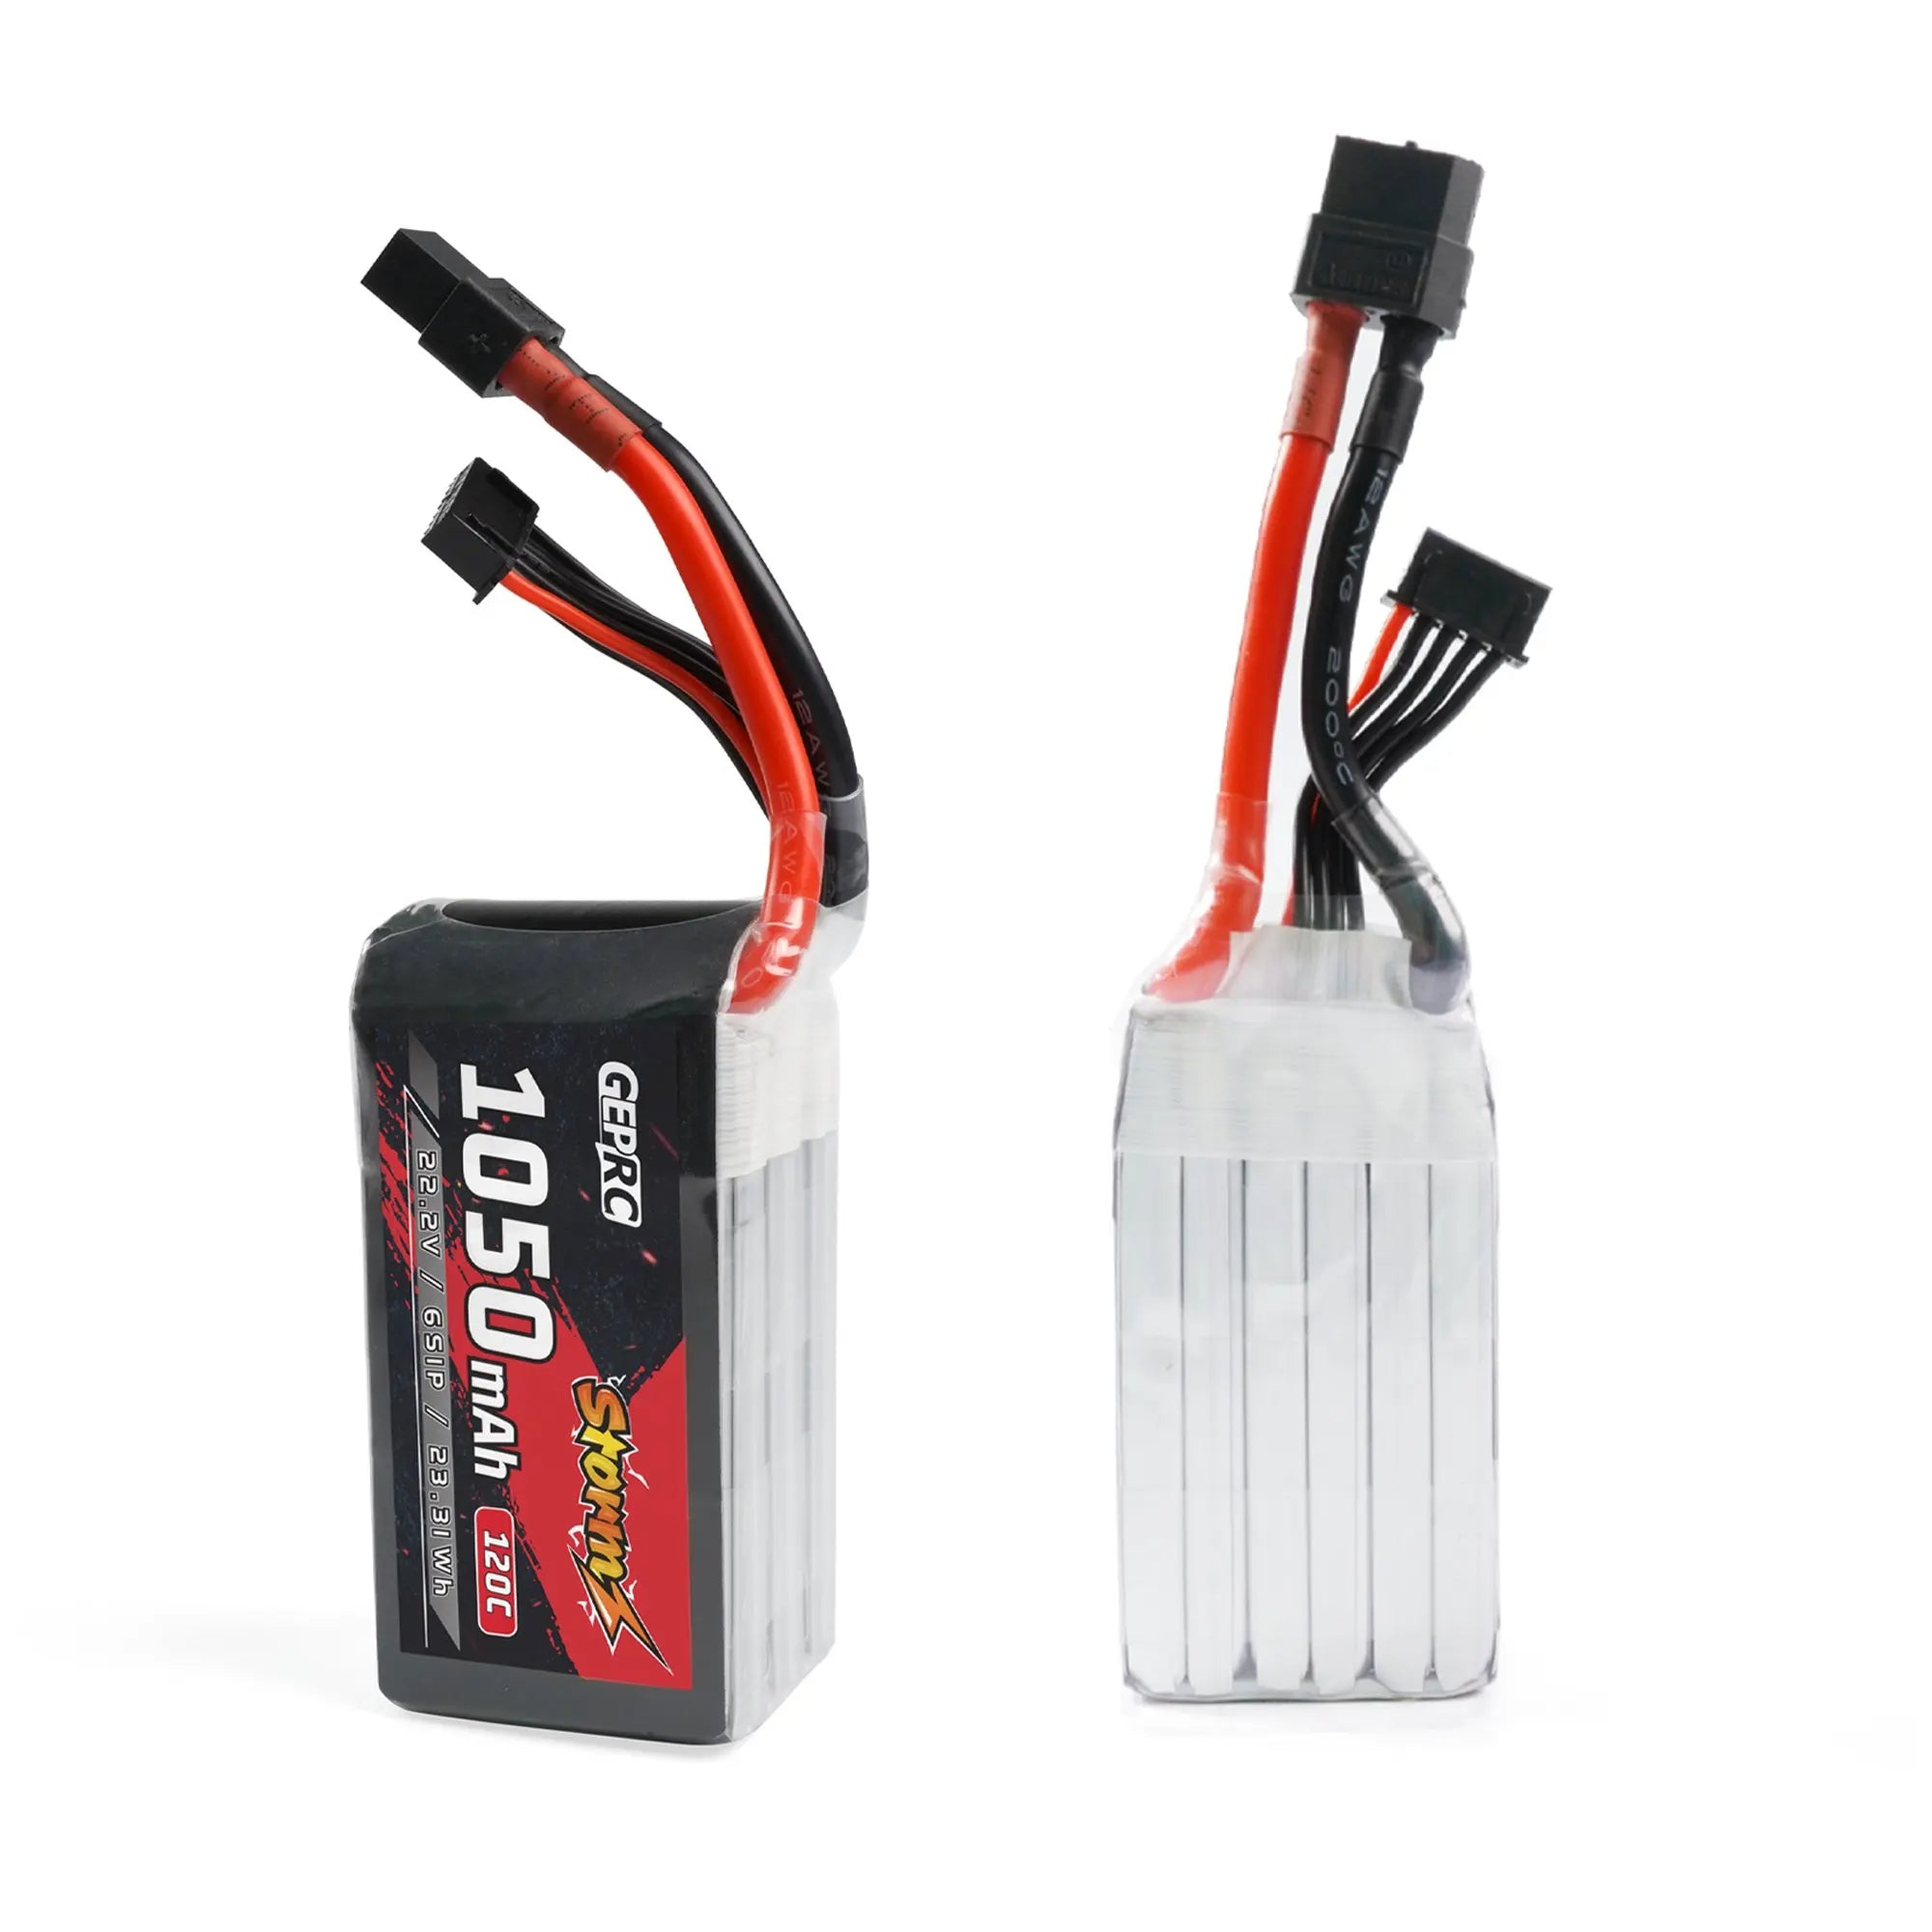 GEPRC Storm 6S 1050mAh 120C Lipo FPV Battery, we’ve been pursuing smaller size, lighter weight, more power and higher capacity FP